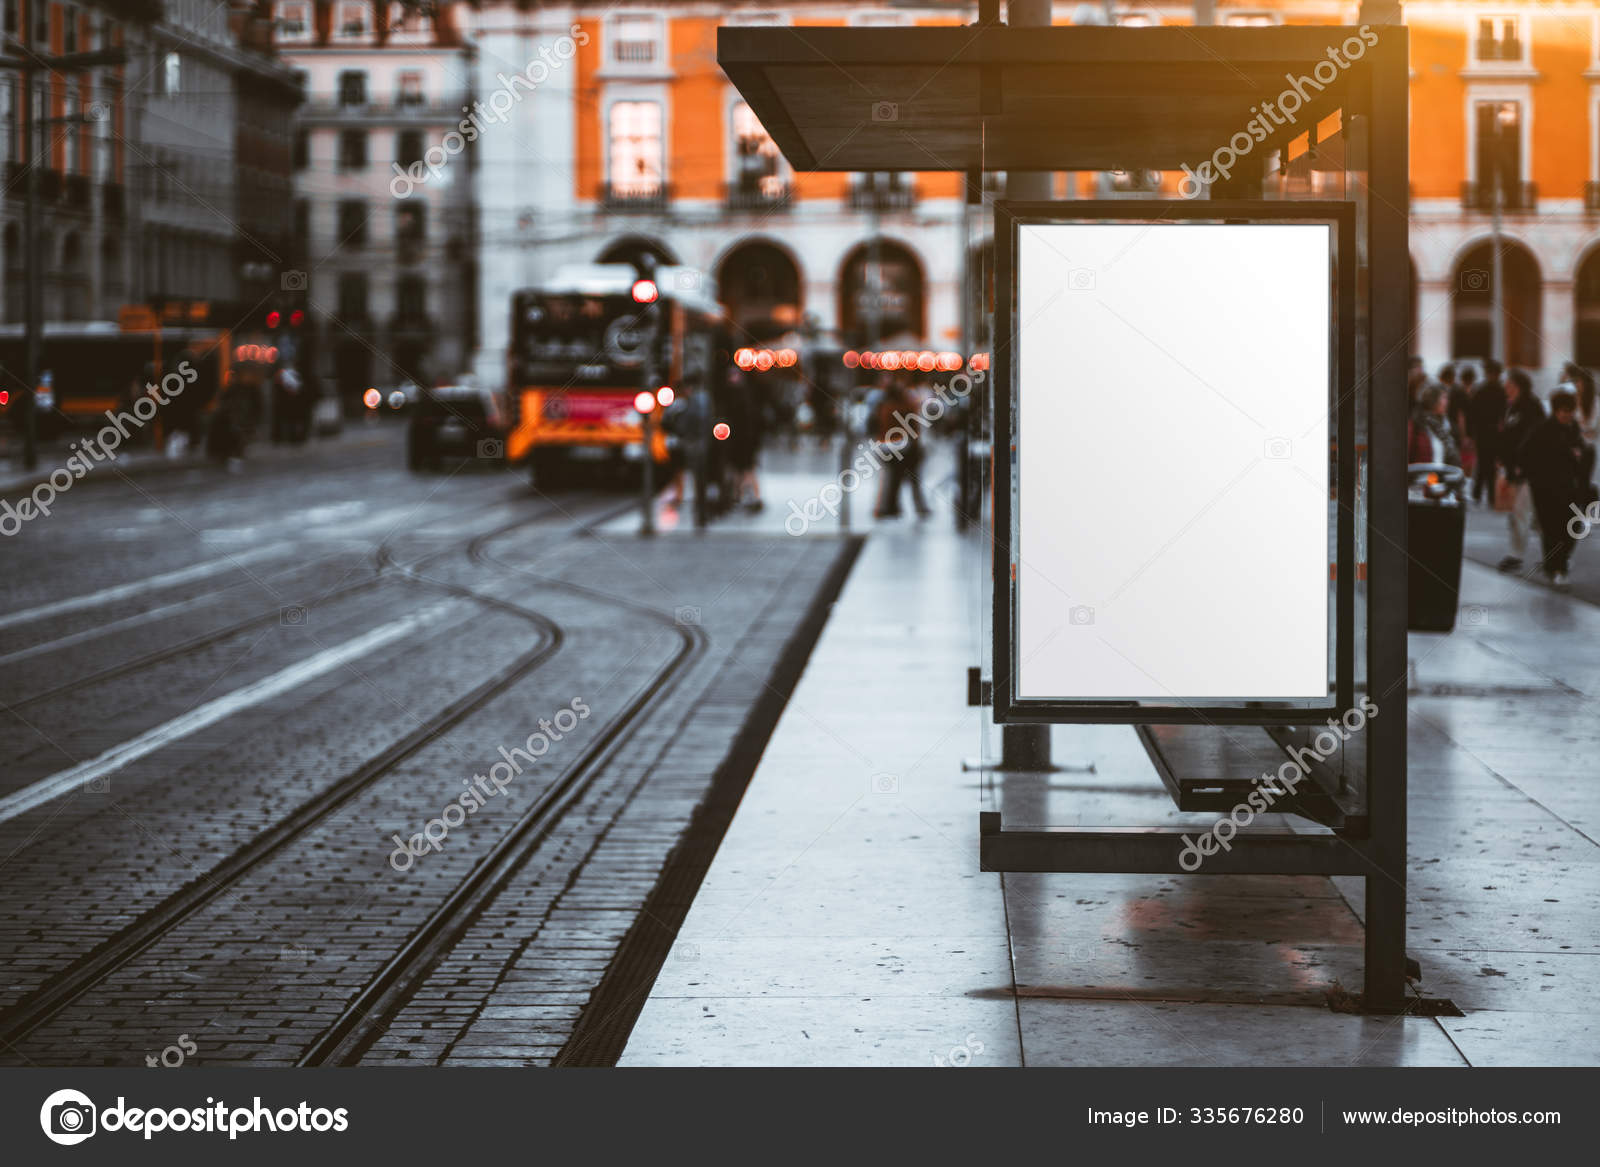 Download A Tram Stop With A Billboard Mock Up Stock Photo Image By C Skynextphoto 335676280